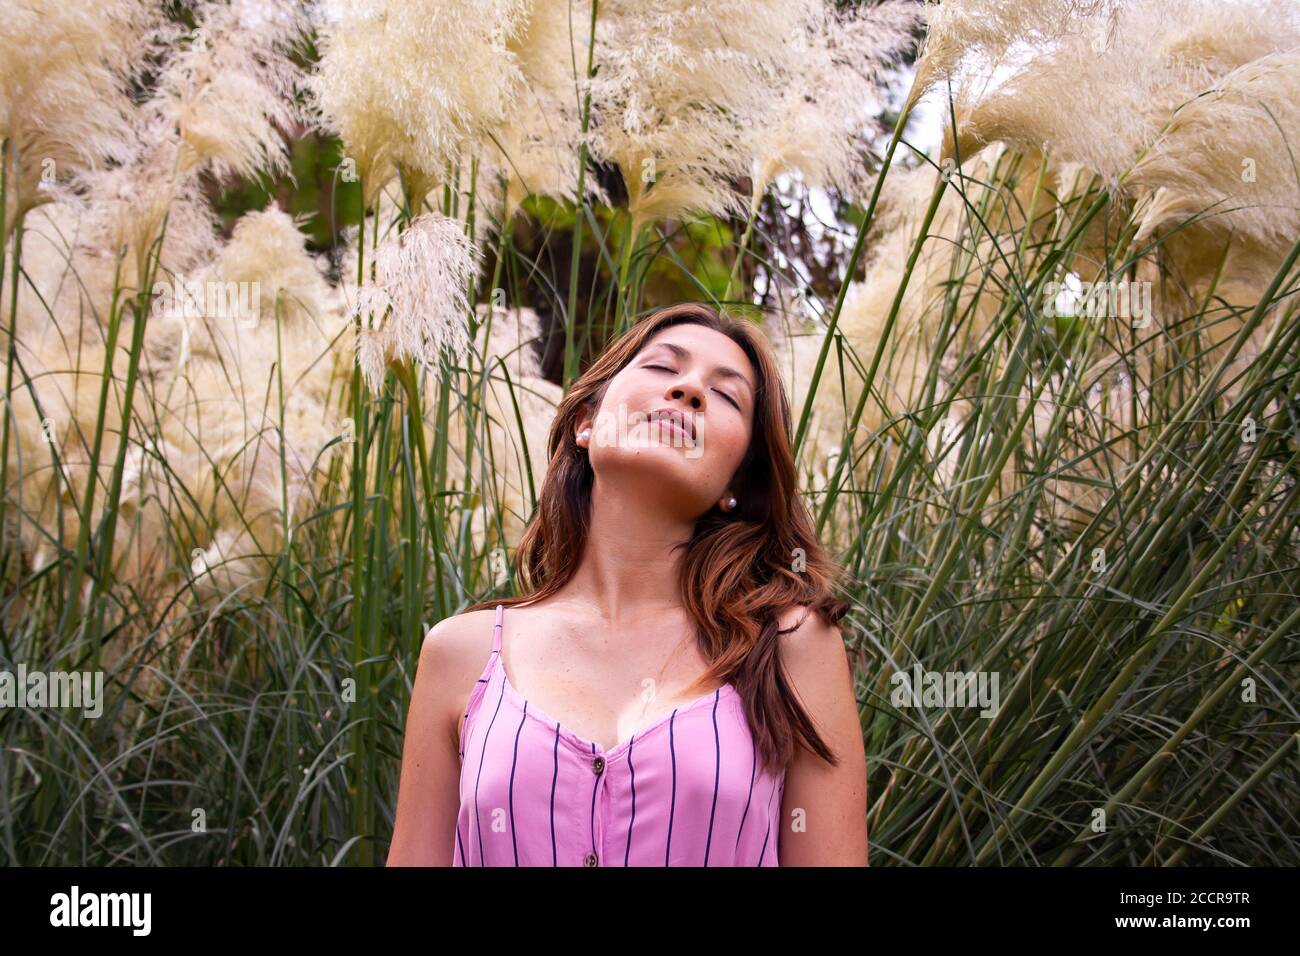 Young woman enjoying a relaxing moment into nature. Some wildflowers surround her in background. Stock Photo